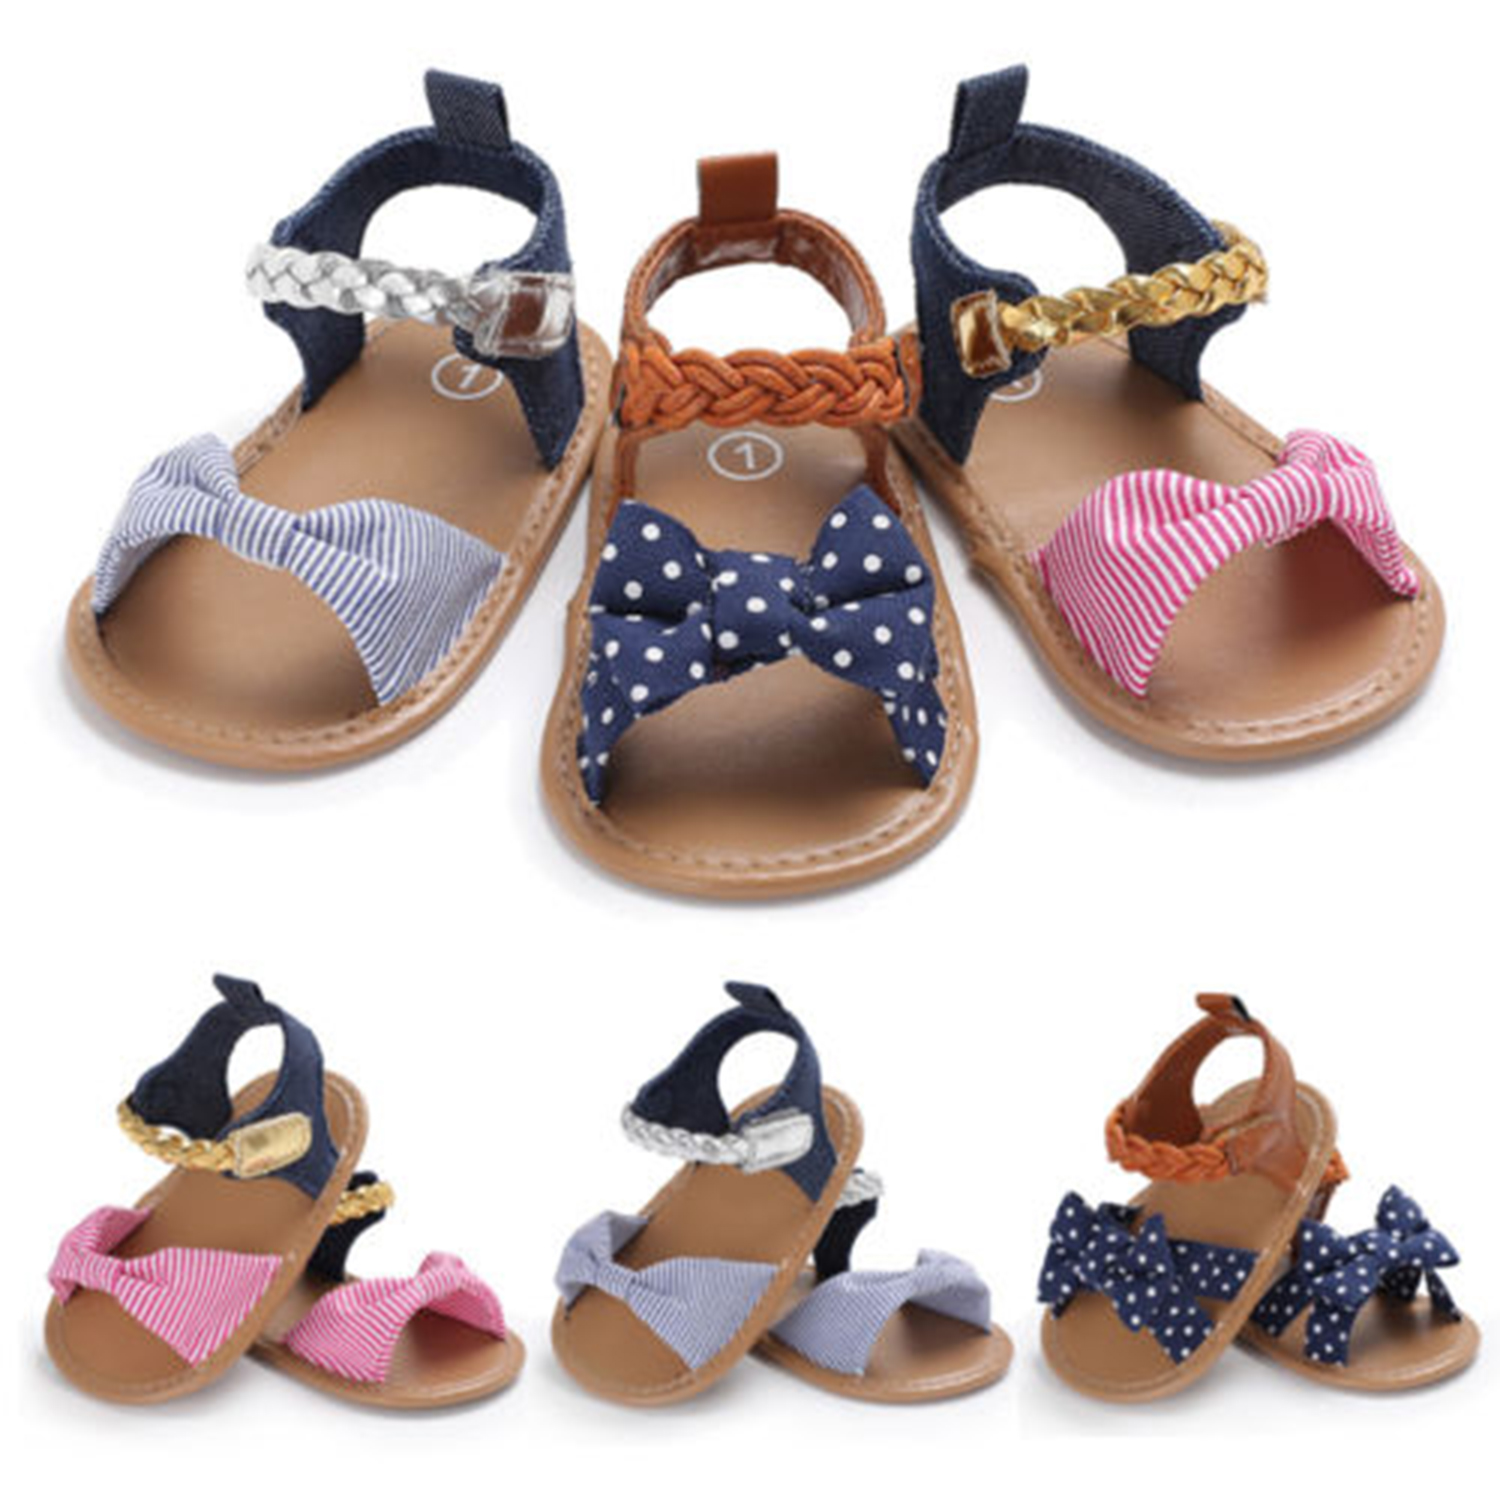 Styles I Love Baby Toddler Girl Bowknot Sandals Soft Sole Anti-slip Crib Shoes Prewalker 0-18M, 5 Colors (Blue + Lace, 6-12 Months) - image 2 of 4